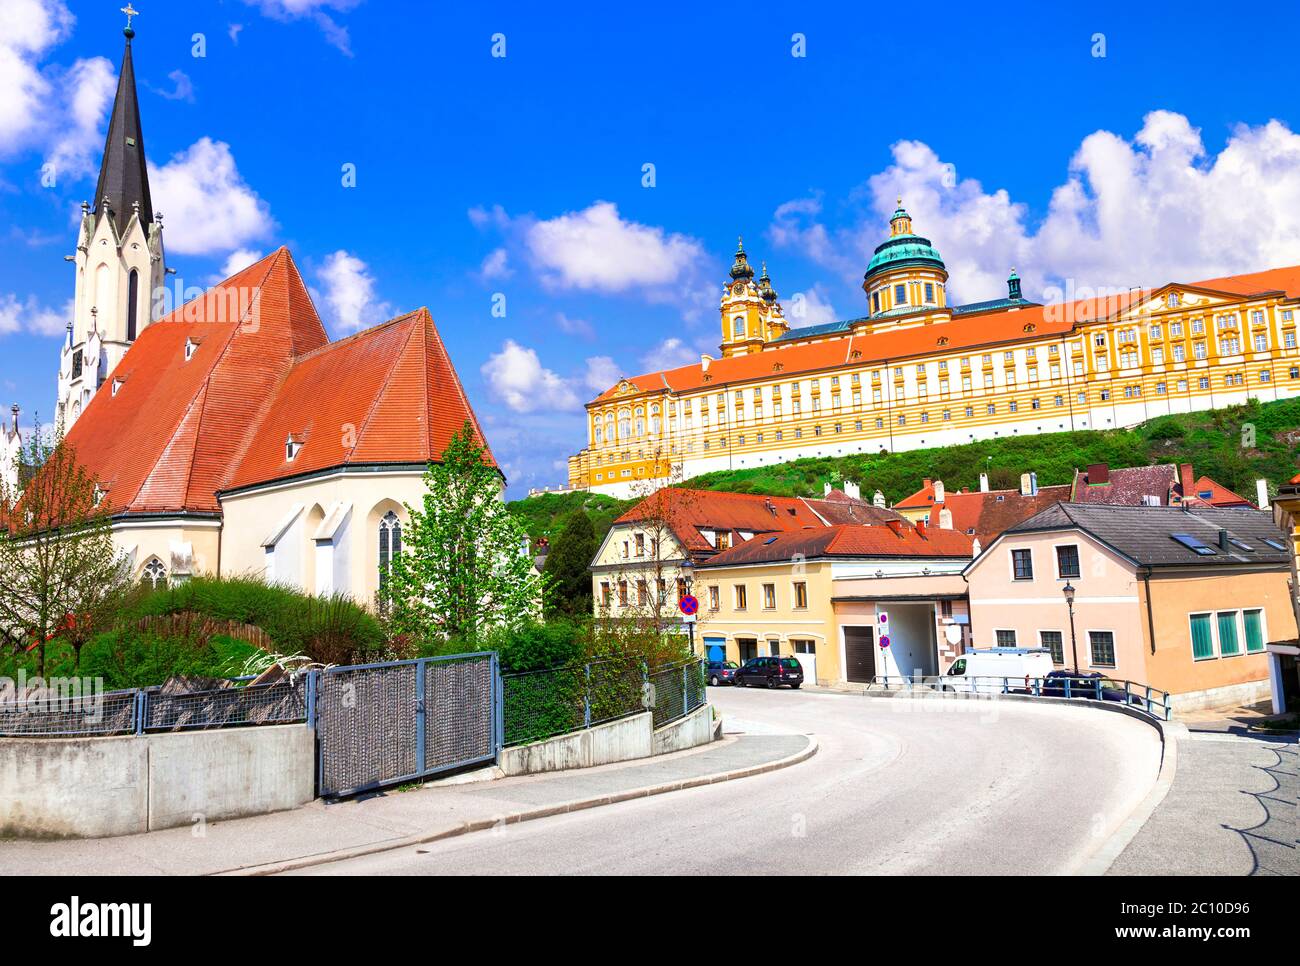 Melk Abbey  - Benedictine abbey above the town of Melk, Lower Austria, famous for cruises over Danube river Stock Photo